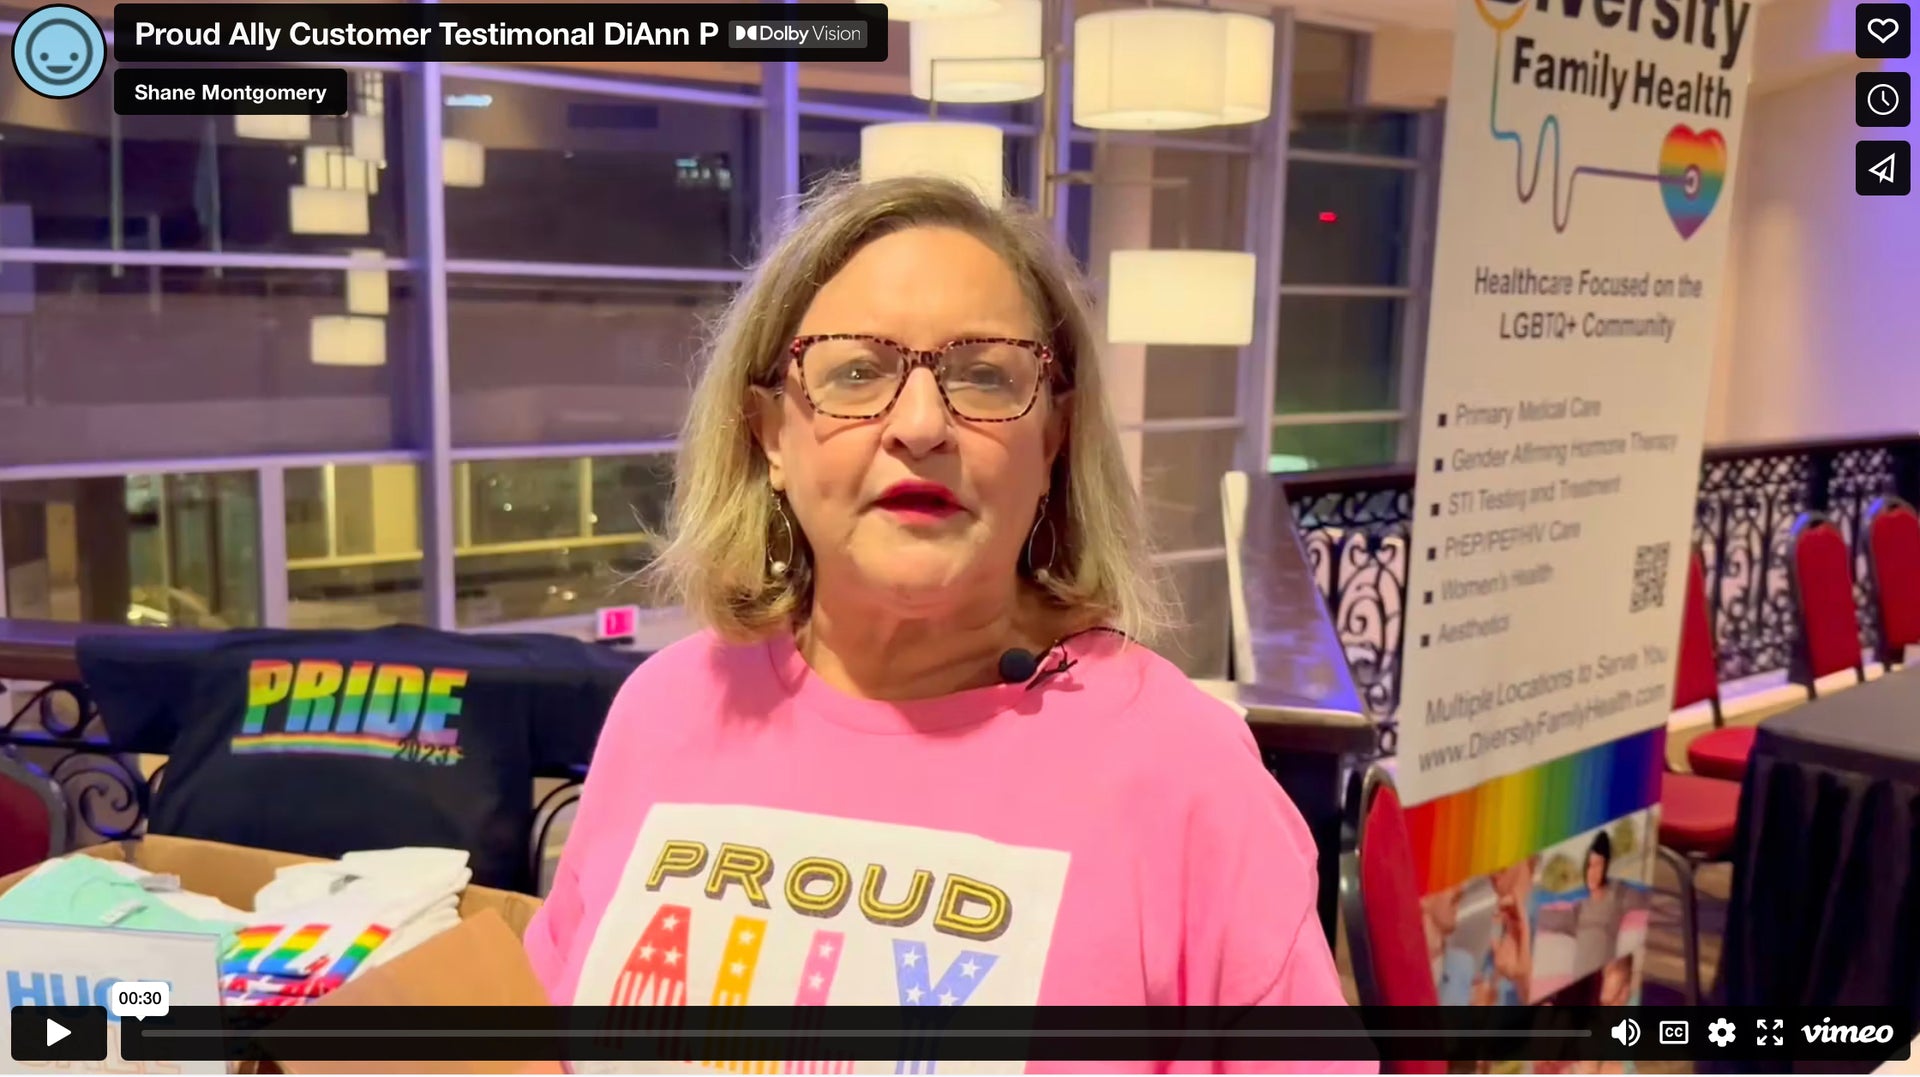 Load video: DiAnn loves her Proud Ally graphic tee from Pride Nation Tees!